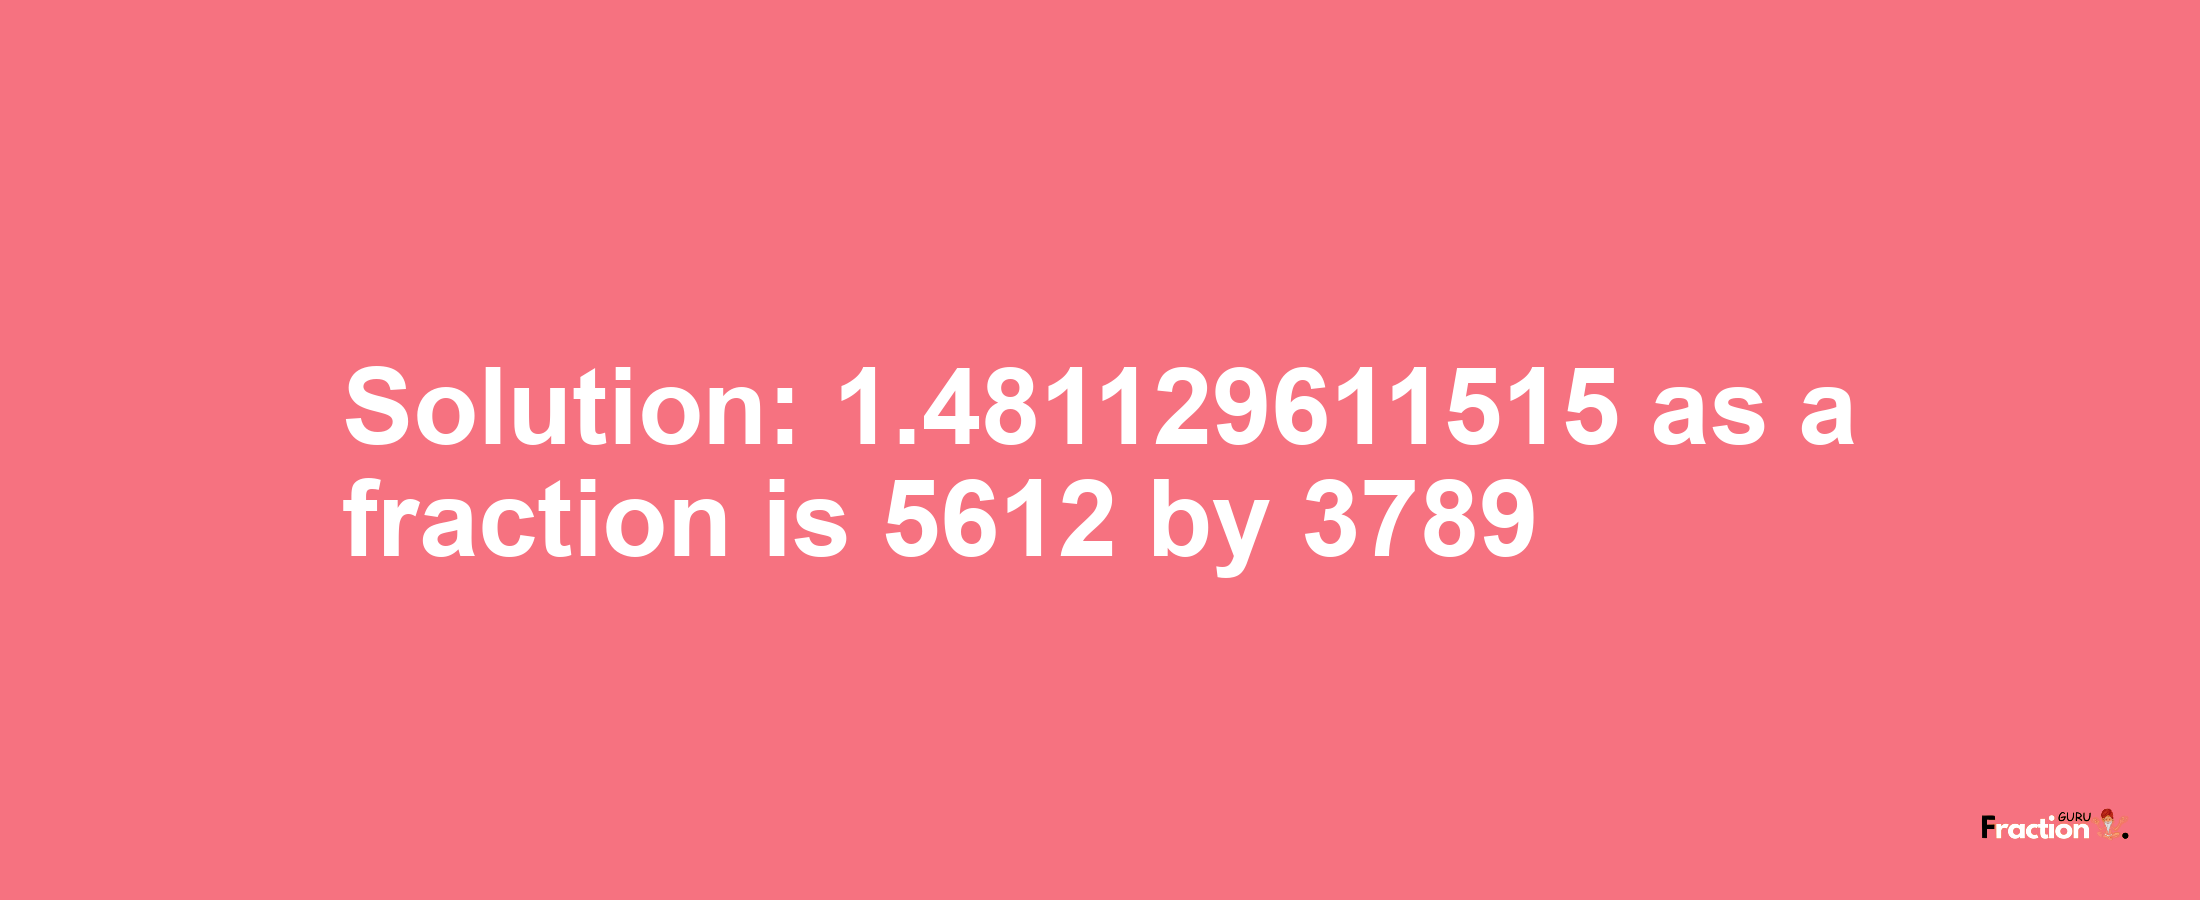 Solution:1.481129611515 as a fraction is 5612/3789